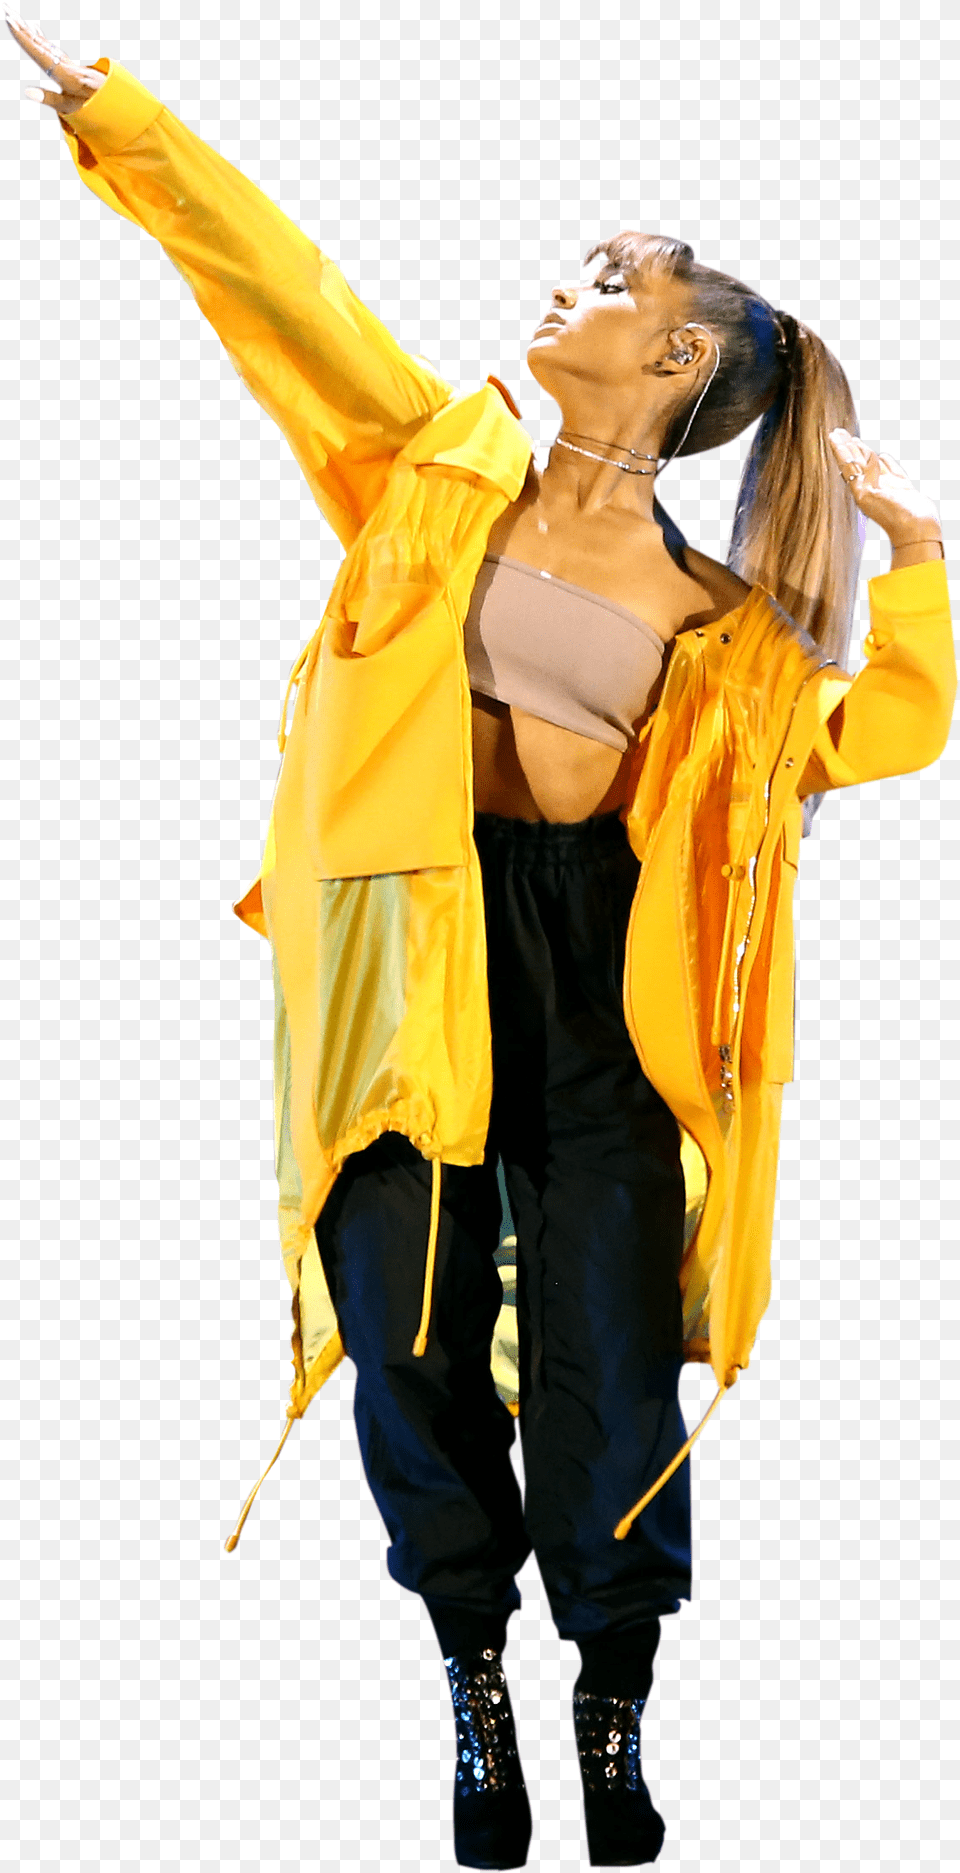 Ariana Grande In Yellow Dress On Stage Aquaman, Person, Clothing, Coat, Dancing Png